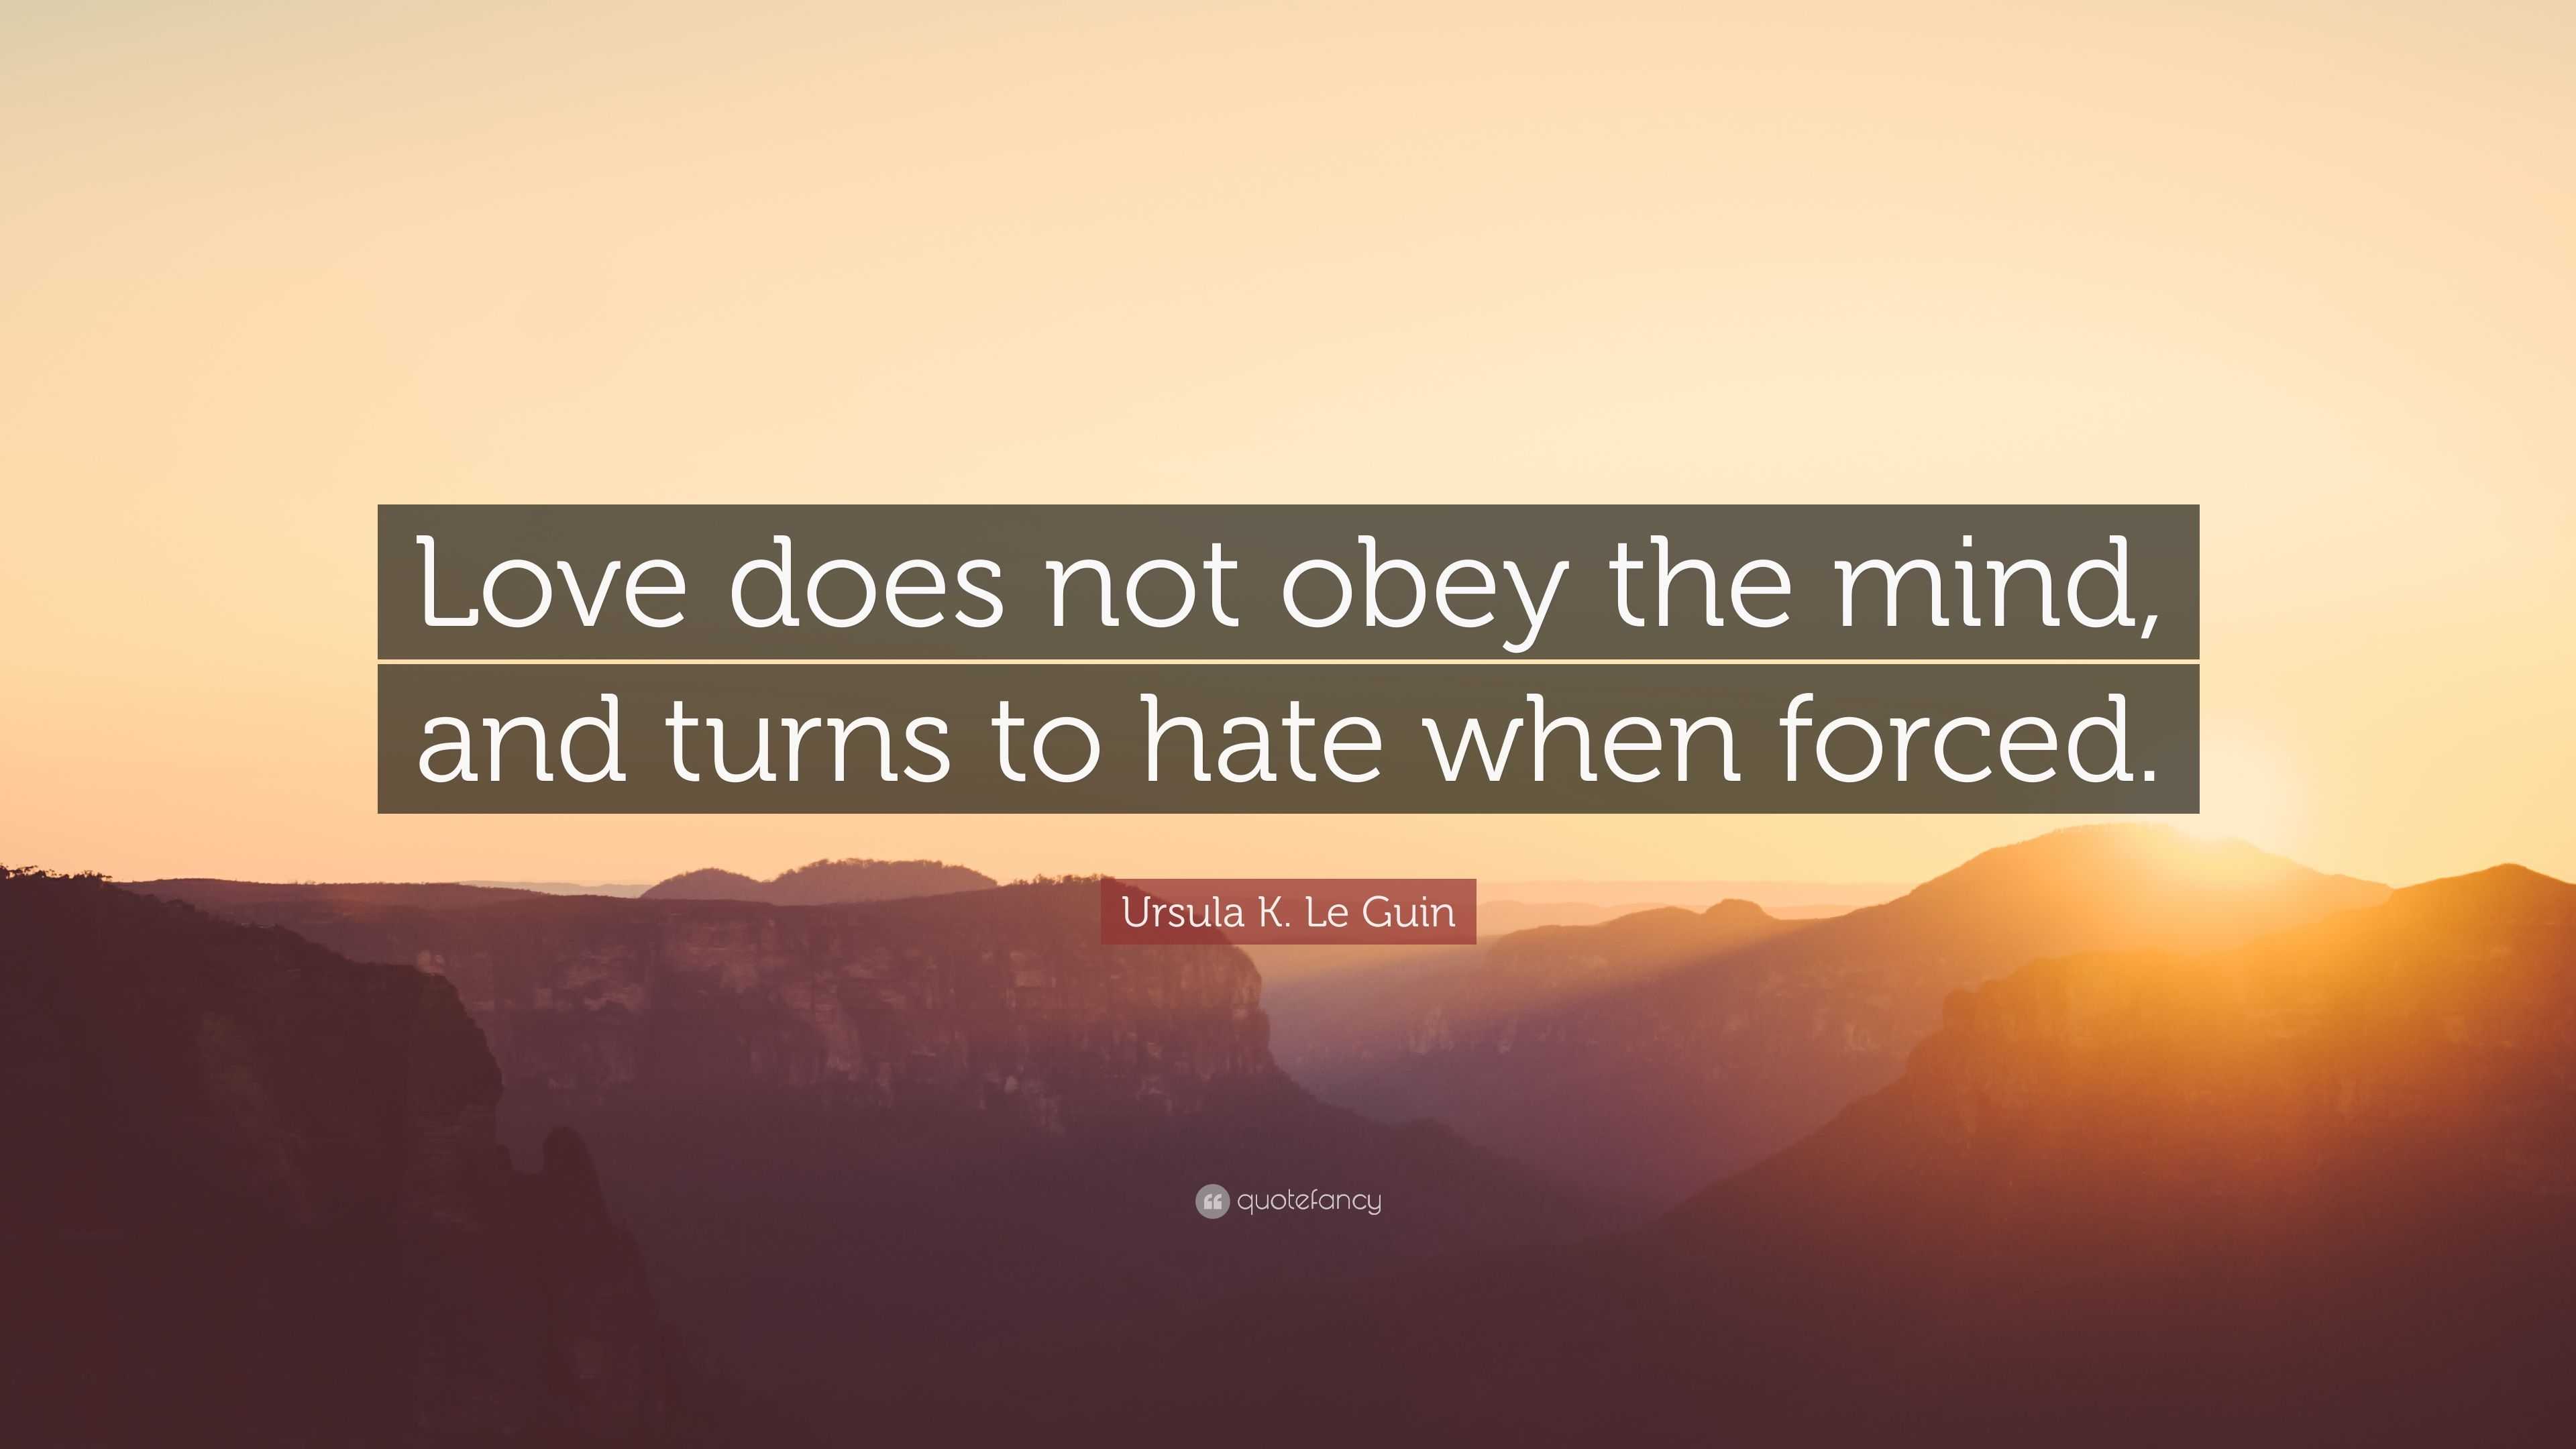 Ursula K Le Guin Quote “Love does not obey the mind and